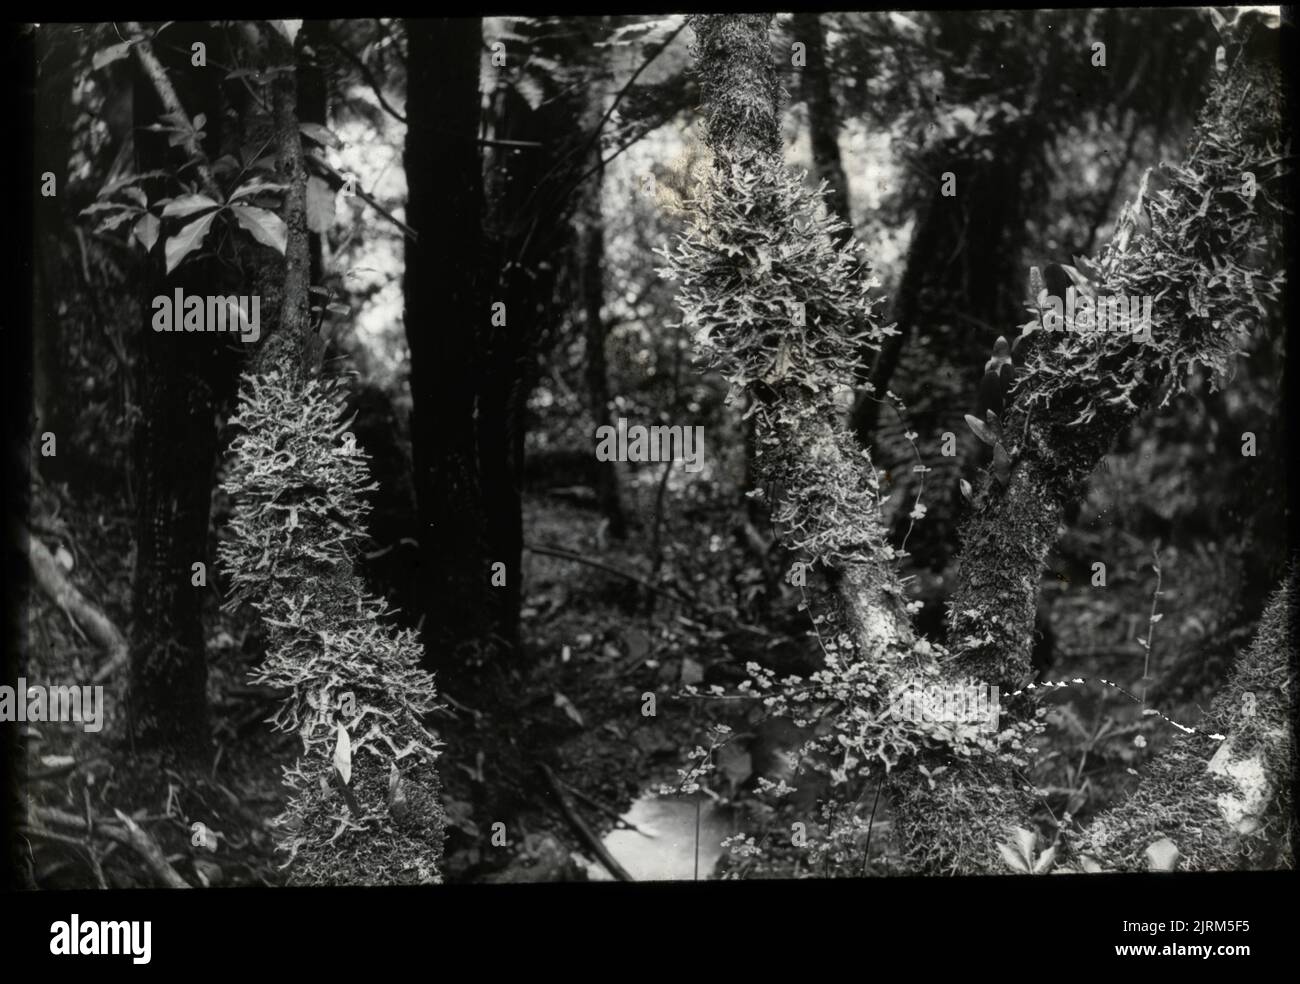 The lichen, Sticta, growing on tree stems in damp shady situation ...., 11 December 1927, North Island, by Leslie Adkin. Gift of Adkin Family, 1997. Stock Photo